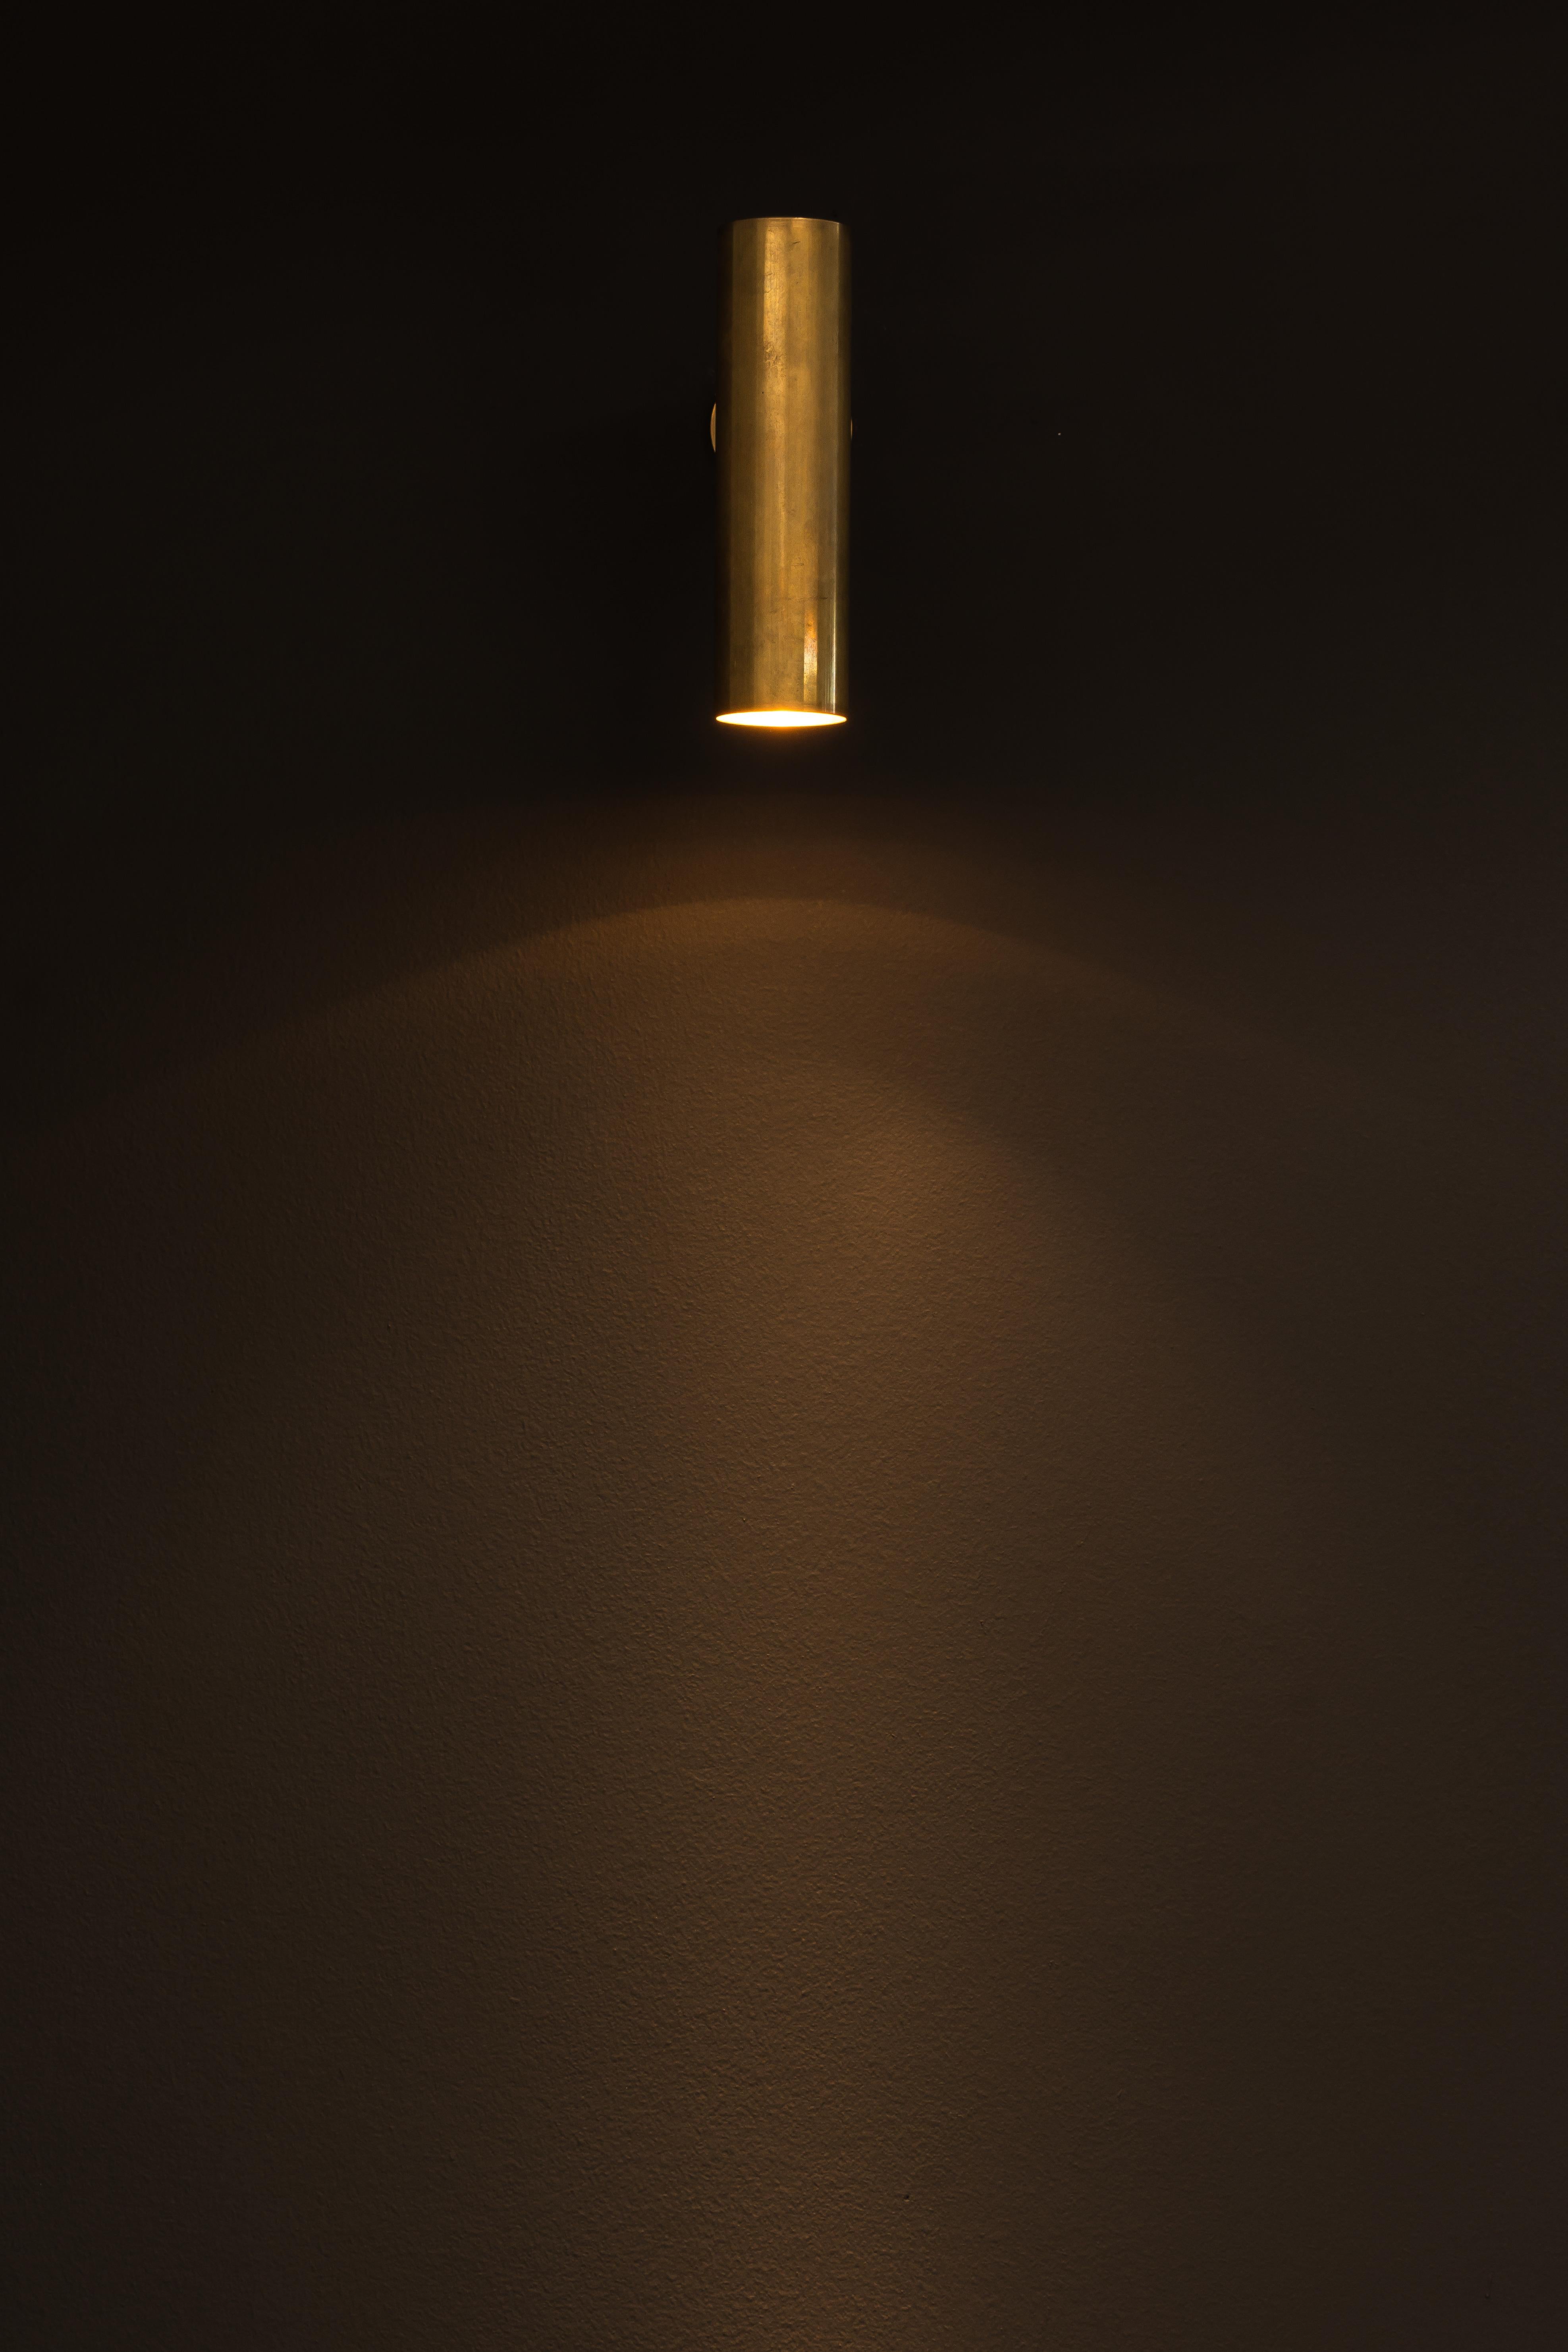 Italian Natural Brass Contemporary-Modern Wall Cylinder Light Handcrafted in Italy For Sale